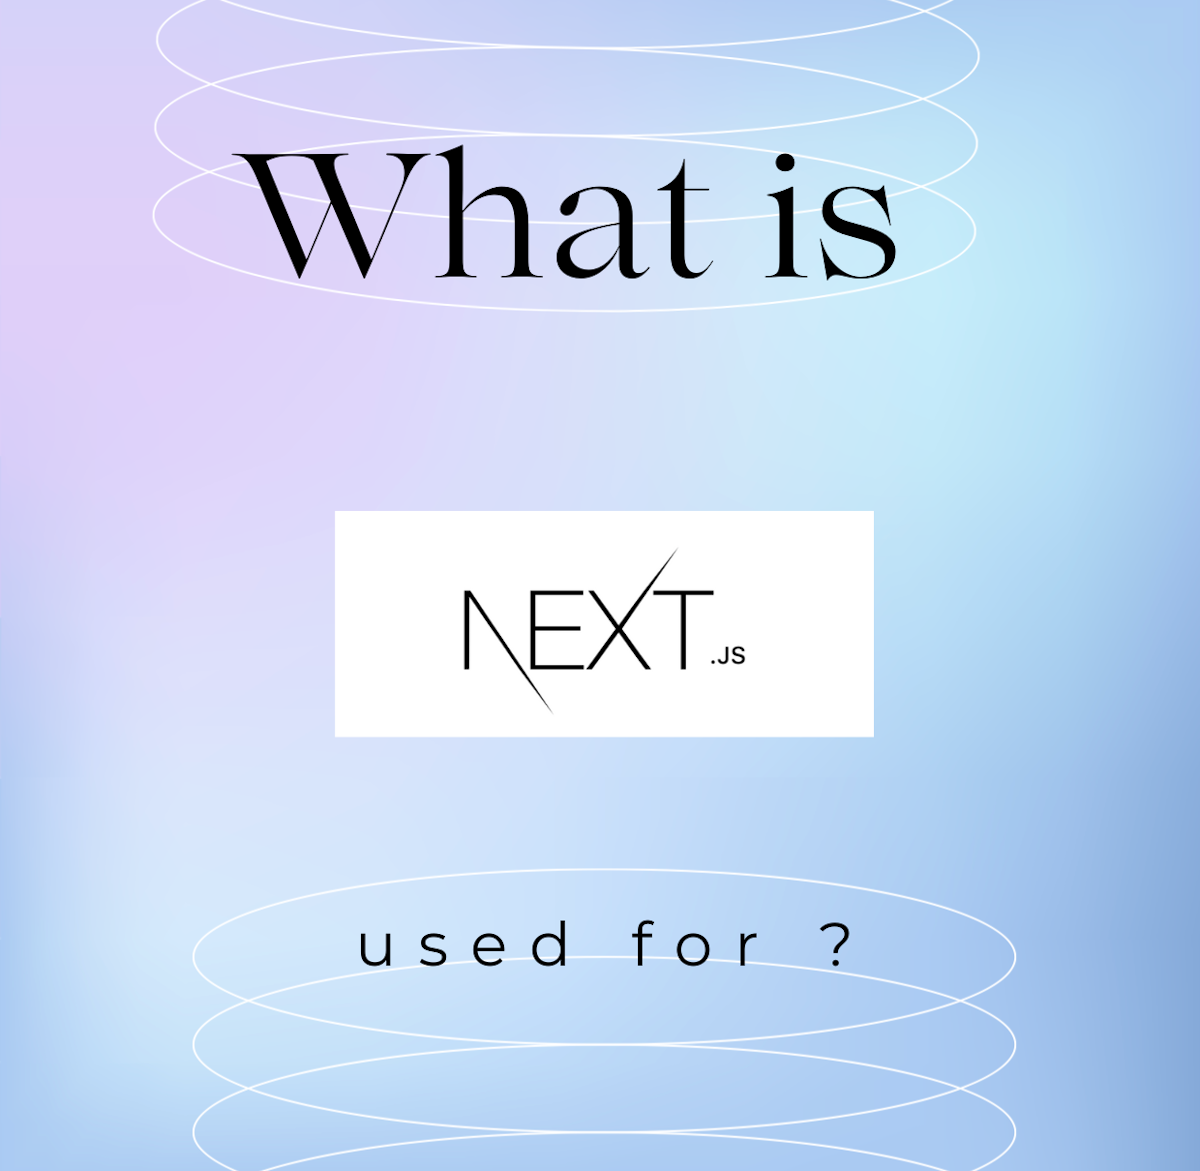 What is Next js used for